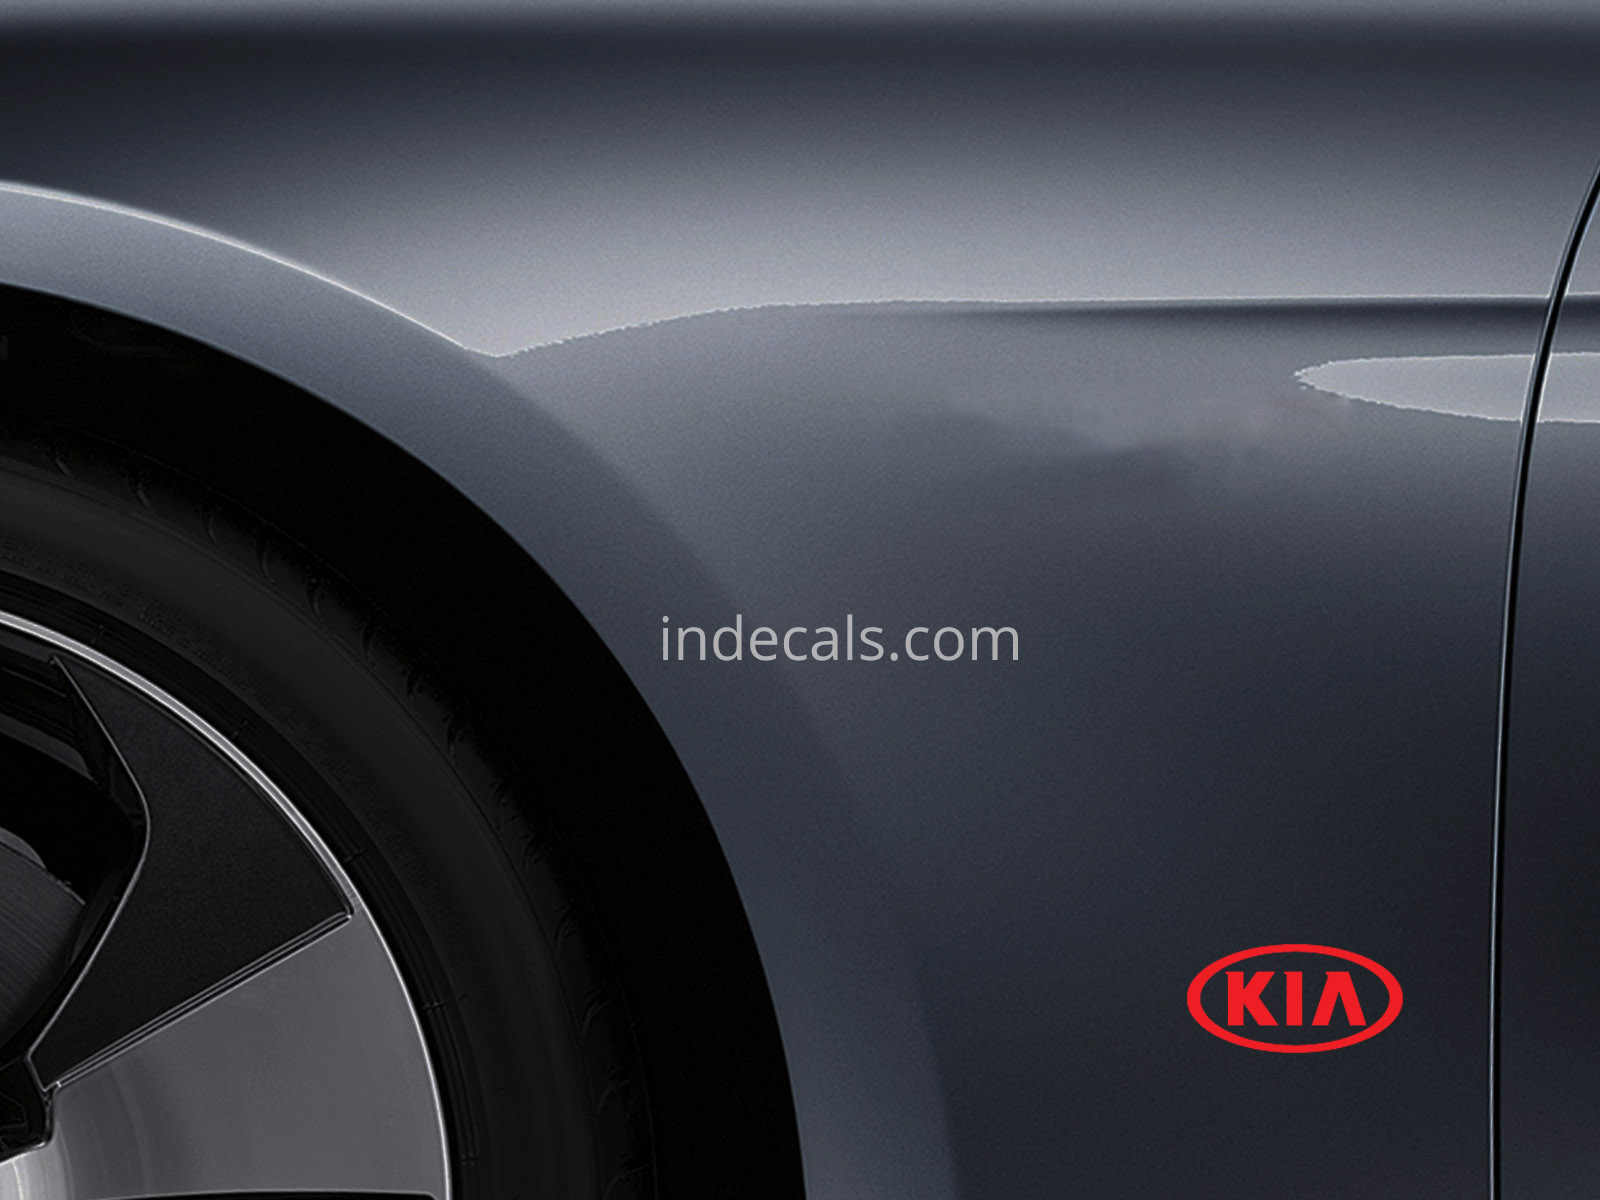 3 x KIA Stickers for Wings - Red